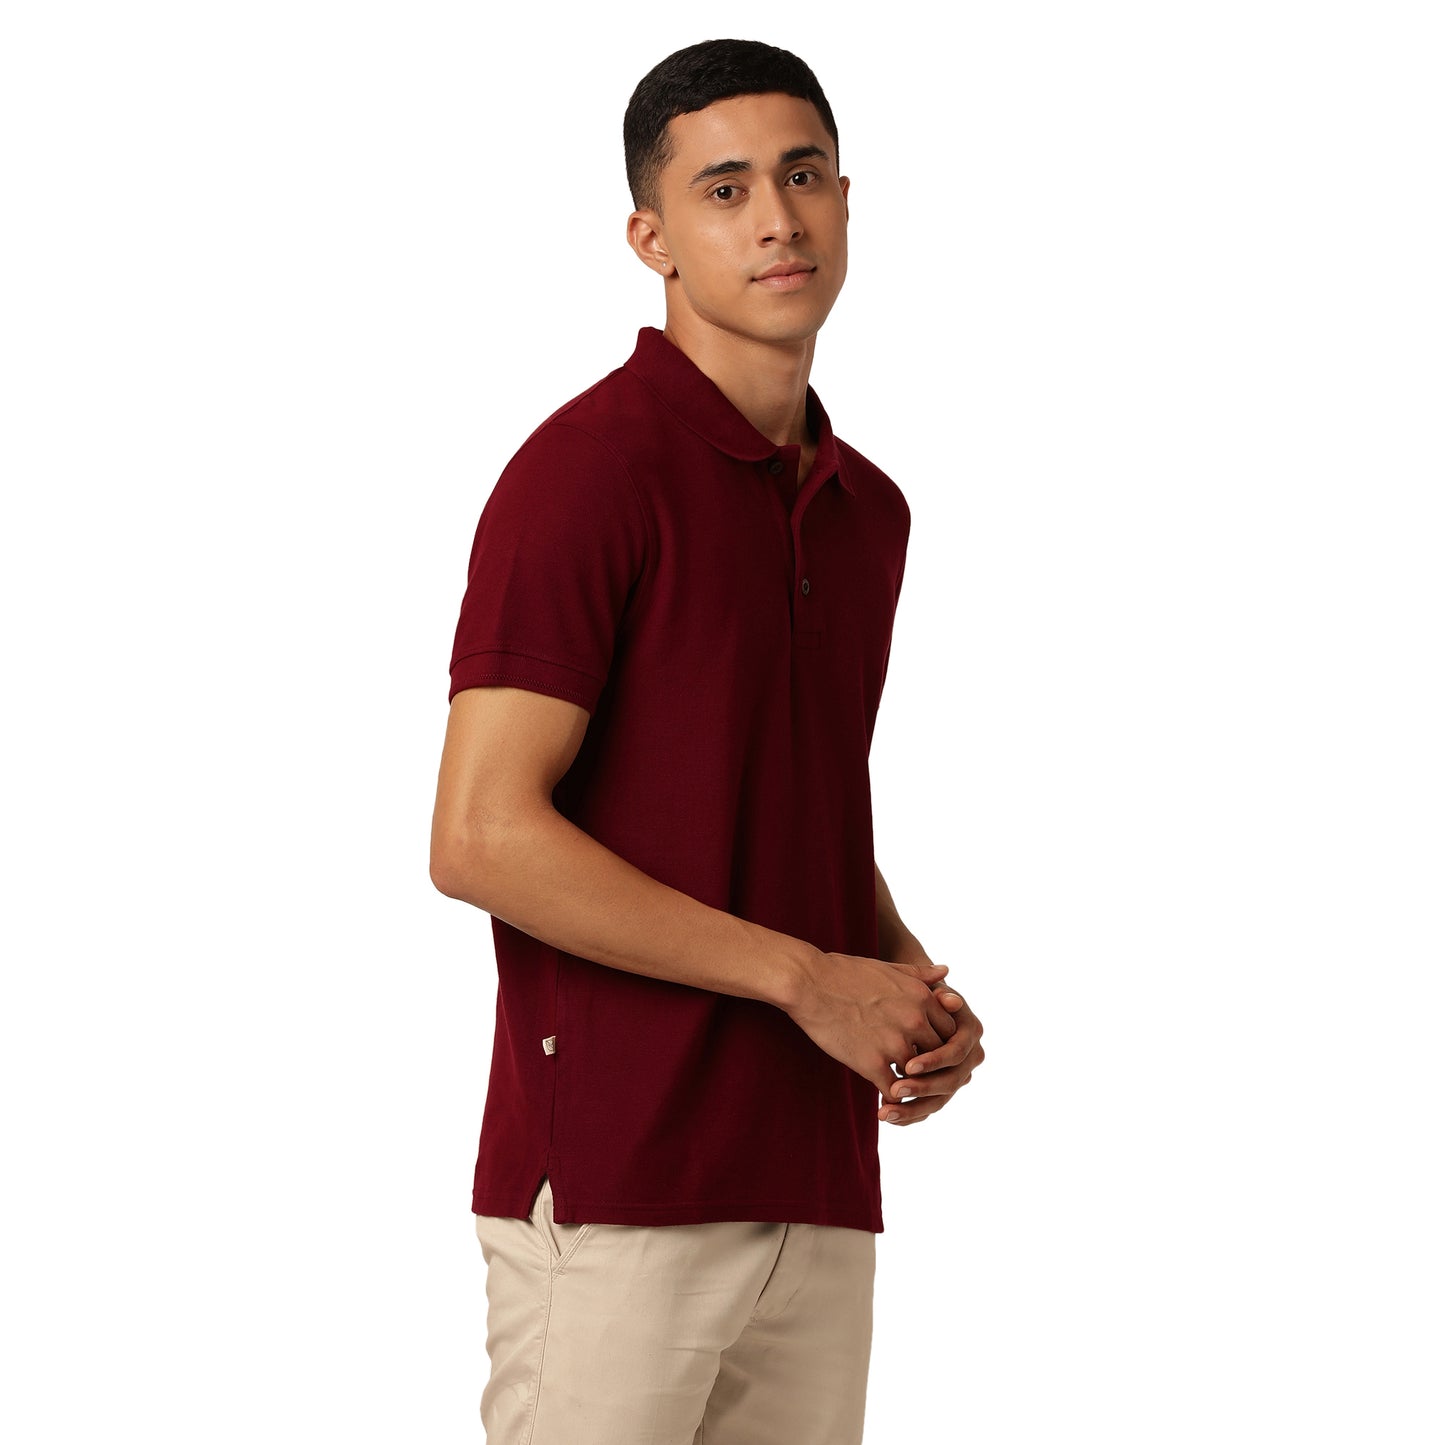 Club Combo Polo Neck T-shirts (Pack of 4)